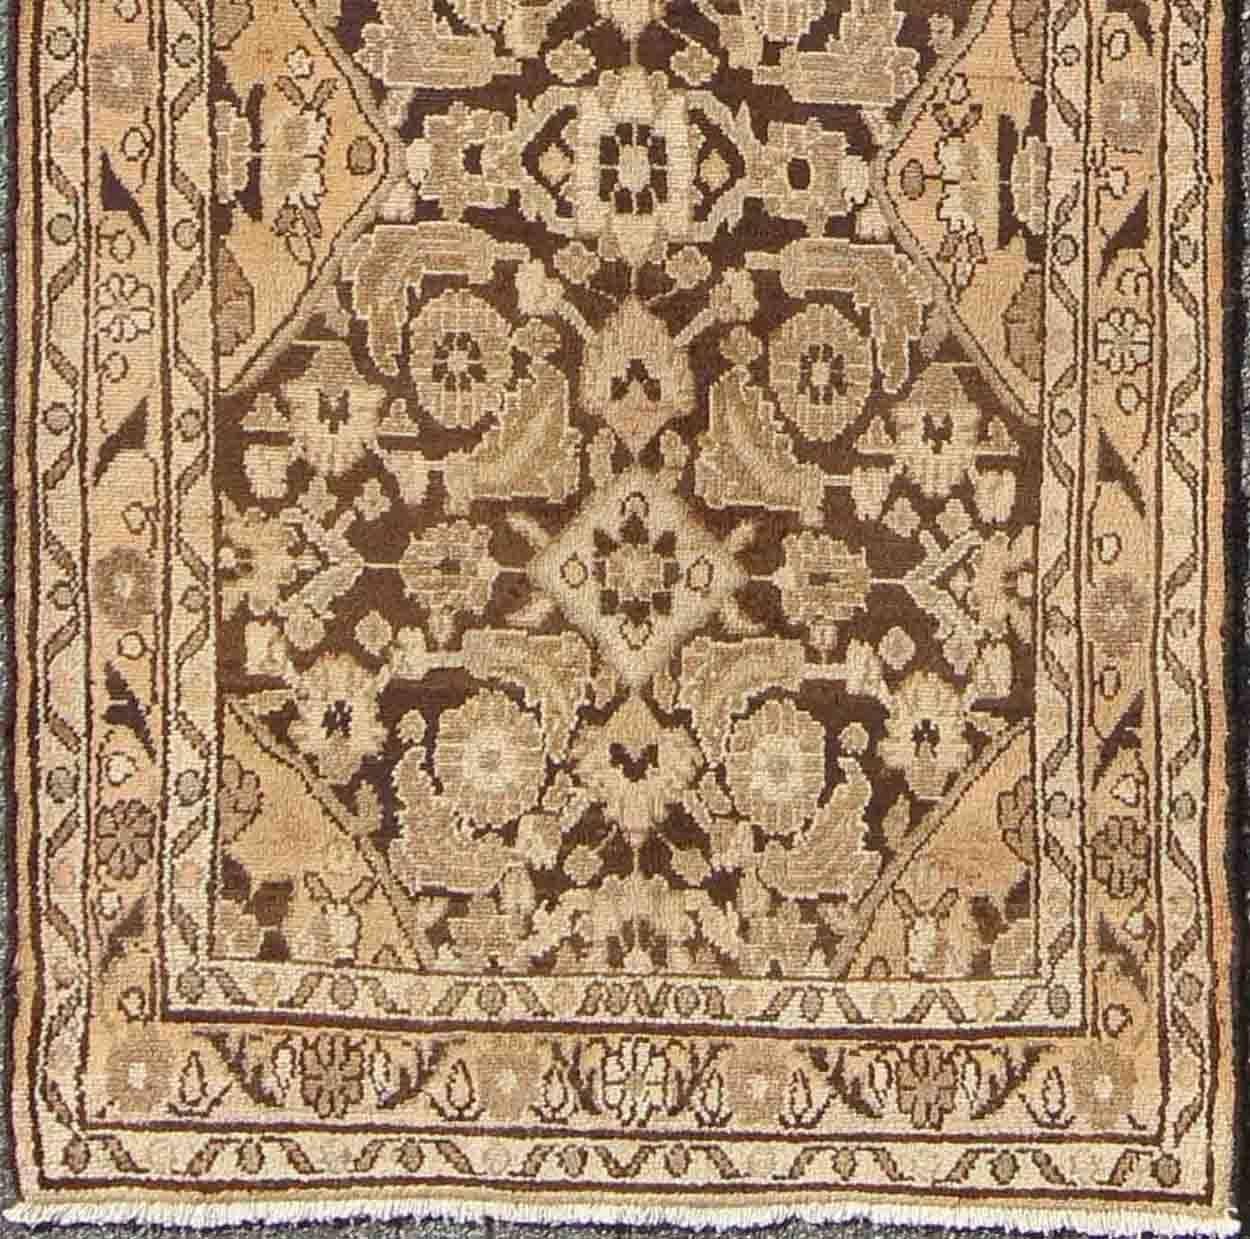 This magnificent Hamedan features beautiful earth colors and tones. The border consists of intricate flowers connected by vines. The main part of the rug has a wonderful pattern consisting of earth tones and a light green-blue color. This unique